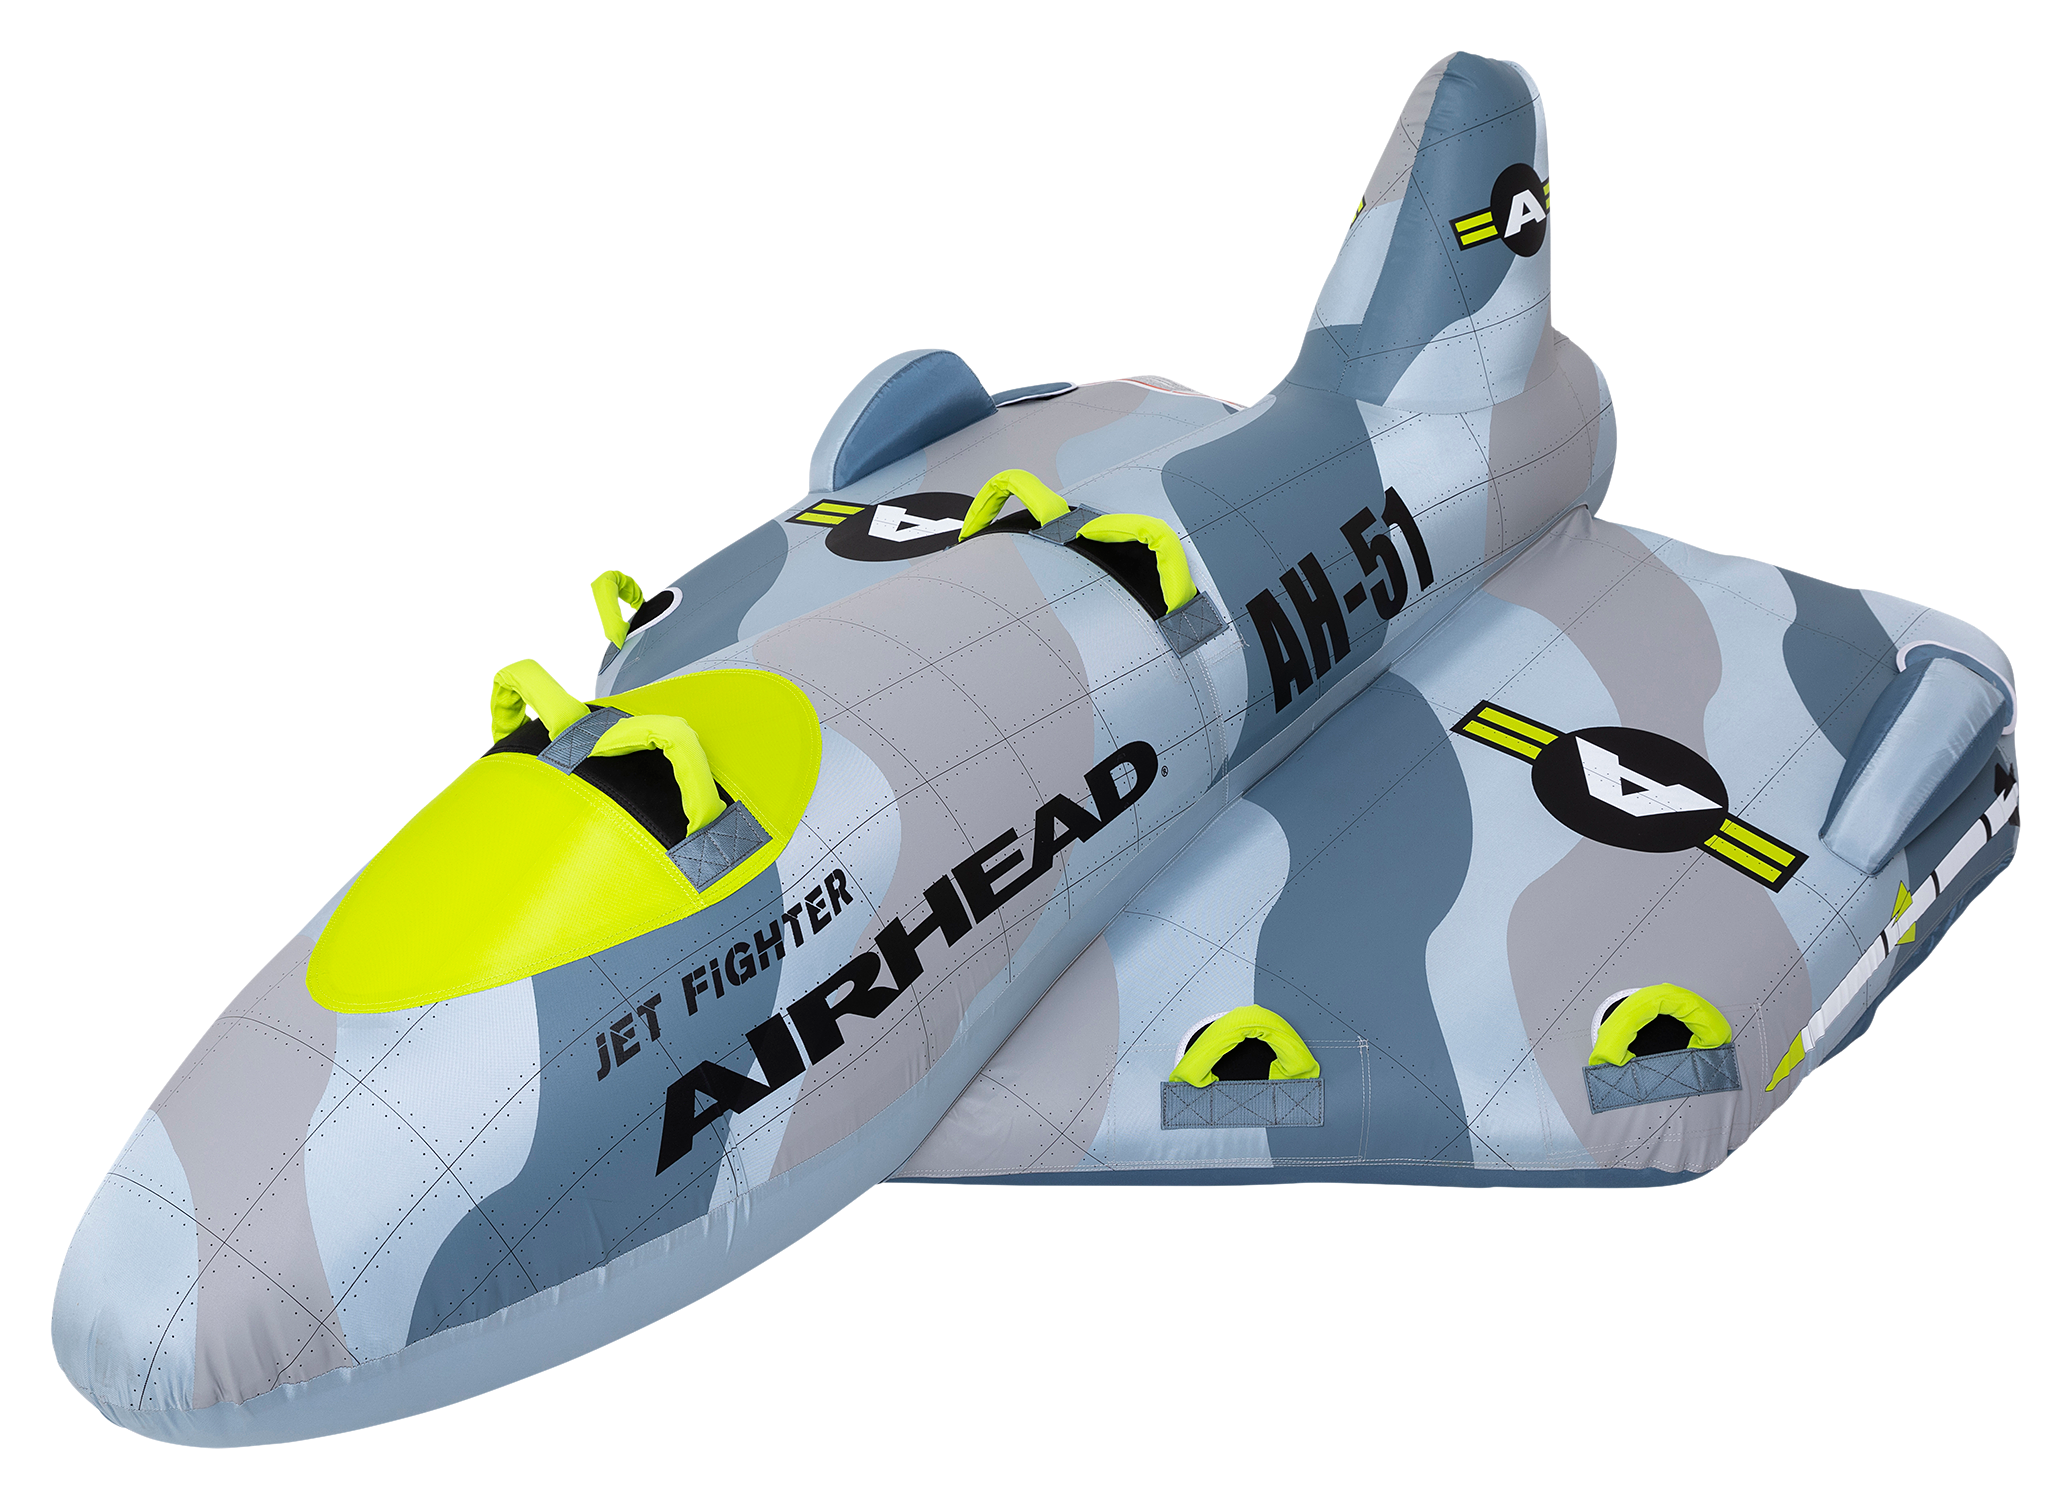 AIRHEAD Jet Fighter Inflatable 4-Person Towable